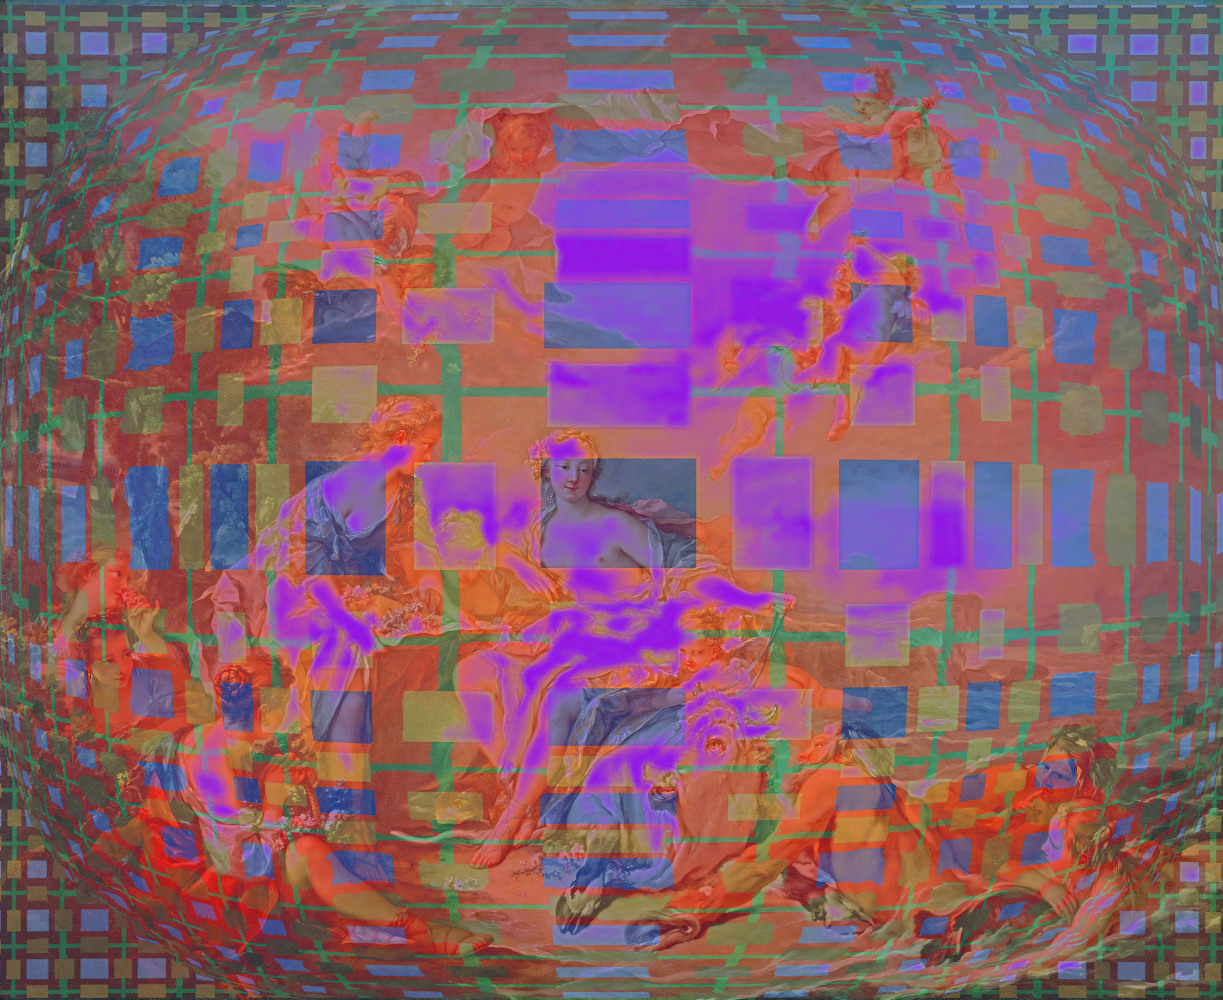 The Rape Of Europa, (After Boucher And Vasarely), 2022 13” x 19” Digitally Produced Print, Edition 1 of 5